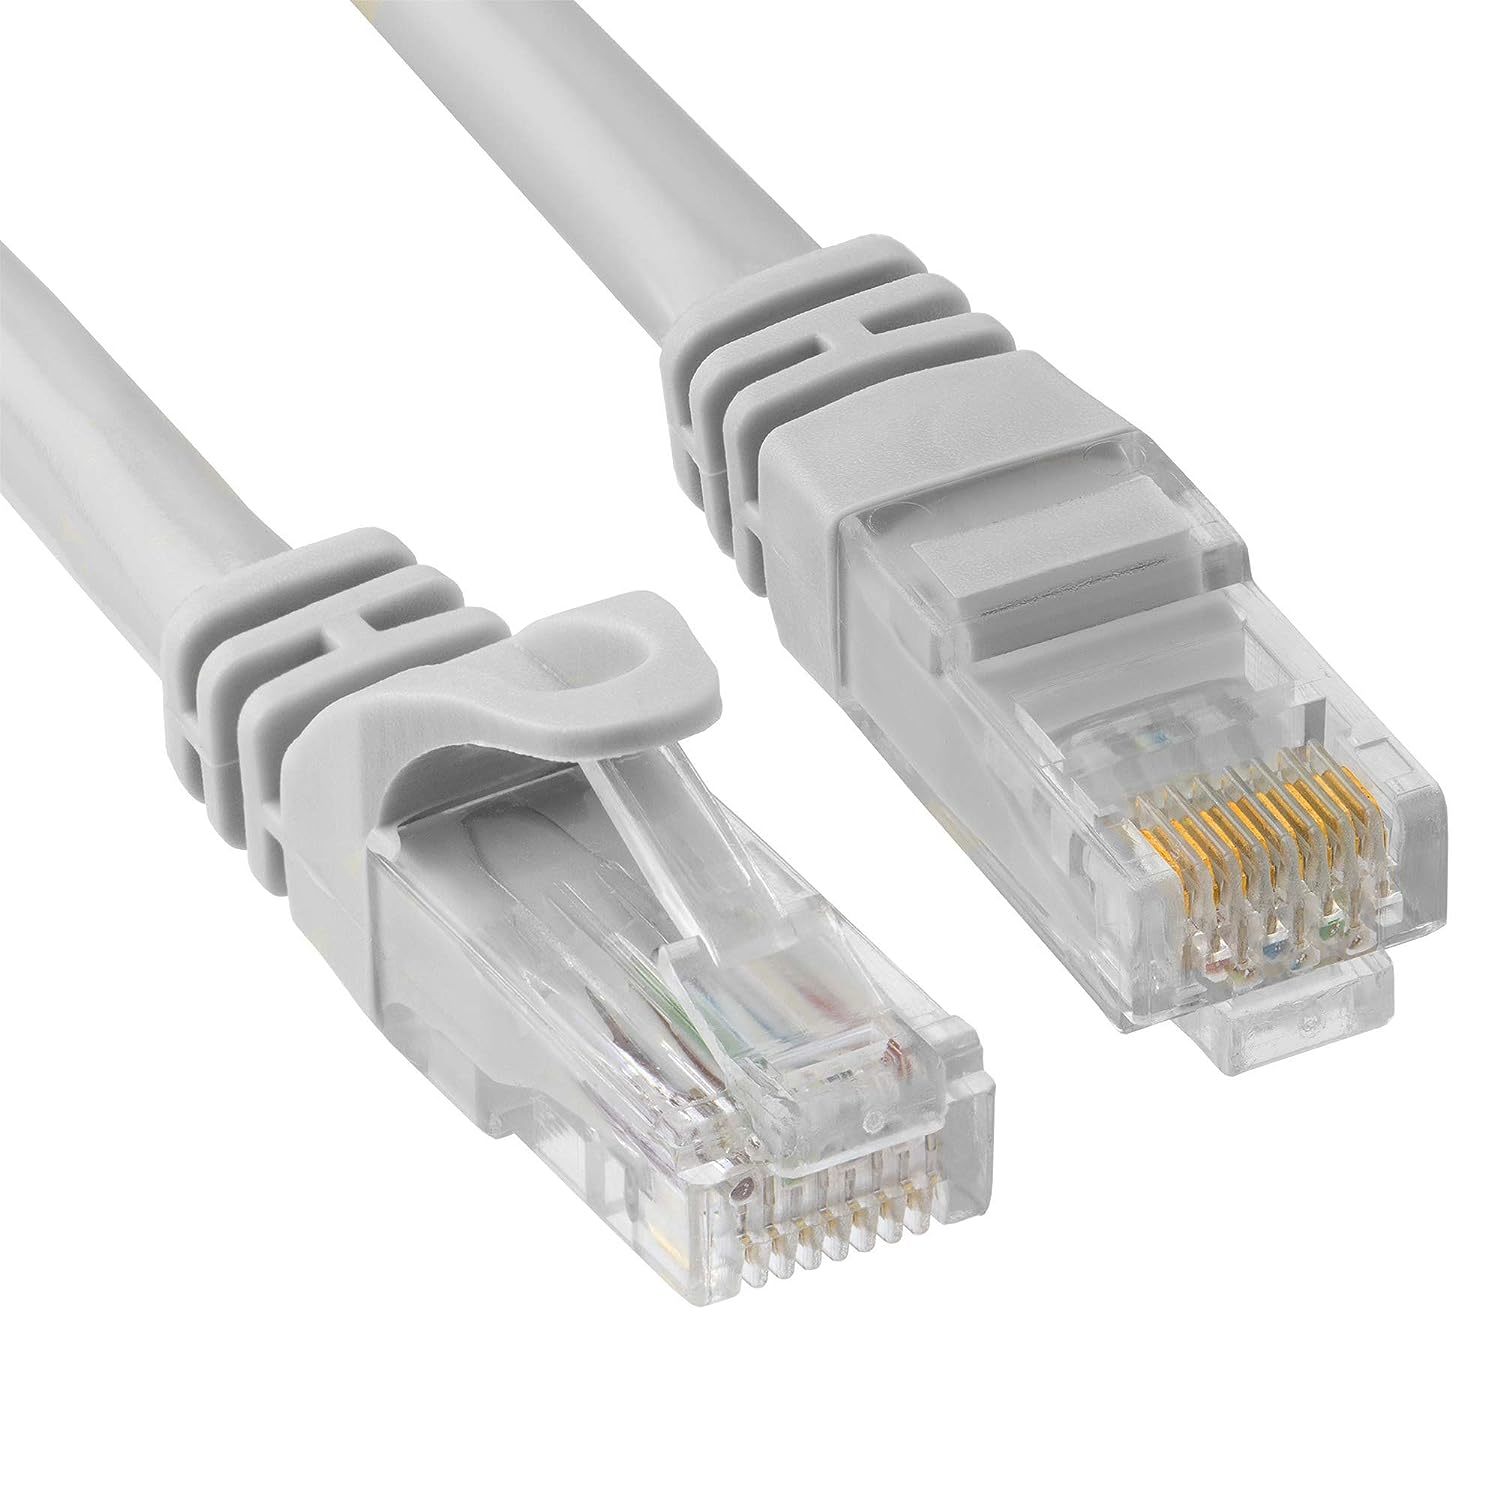 Cmple - High Speed Cat 6 Cable - 10 Gbps Network Cable, Cat6 Ethernet LAN, Gold  - $30.99